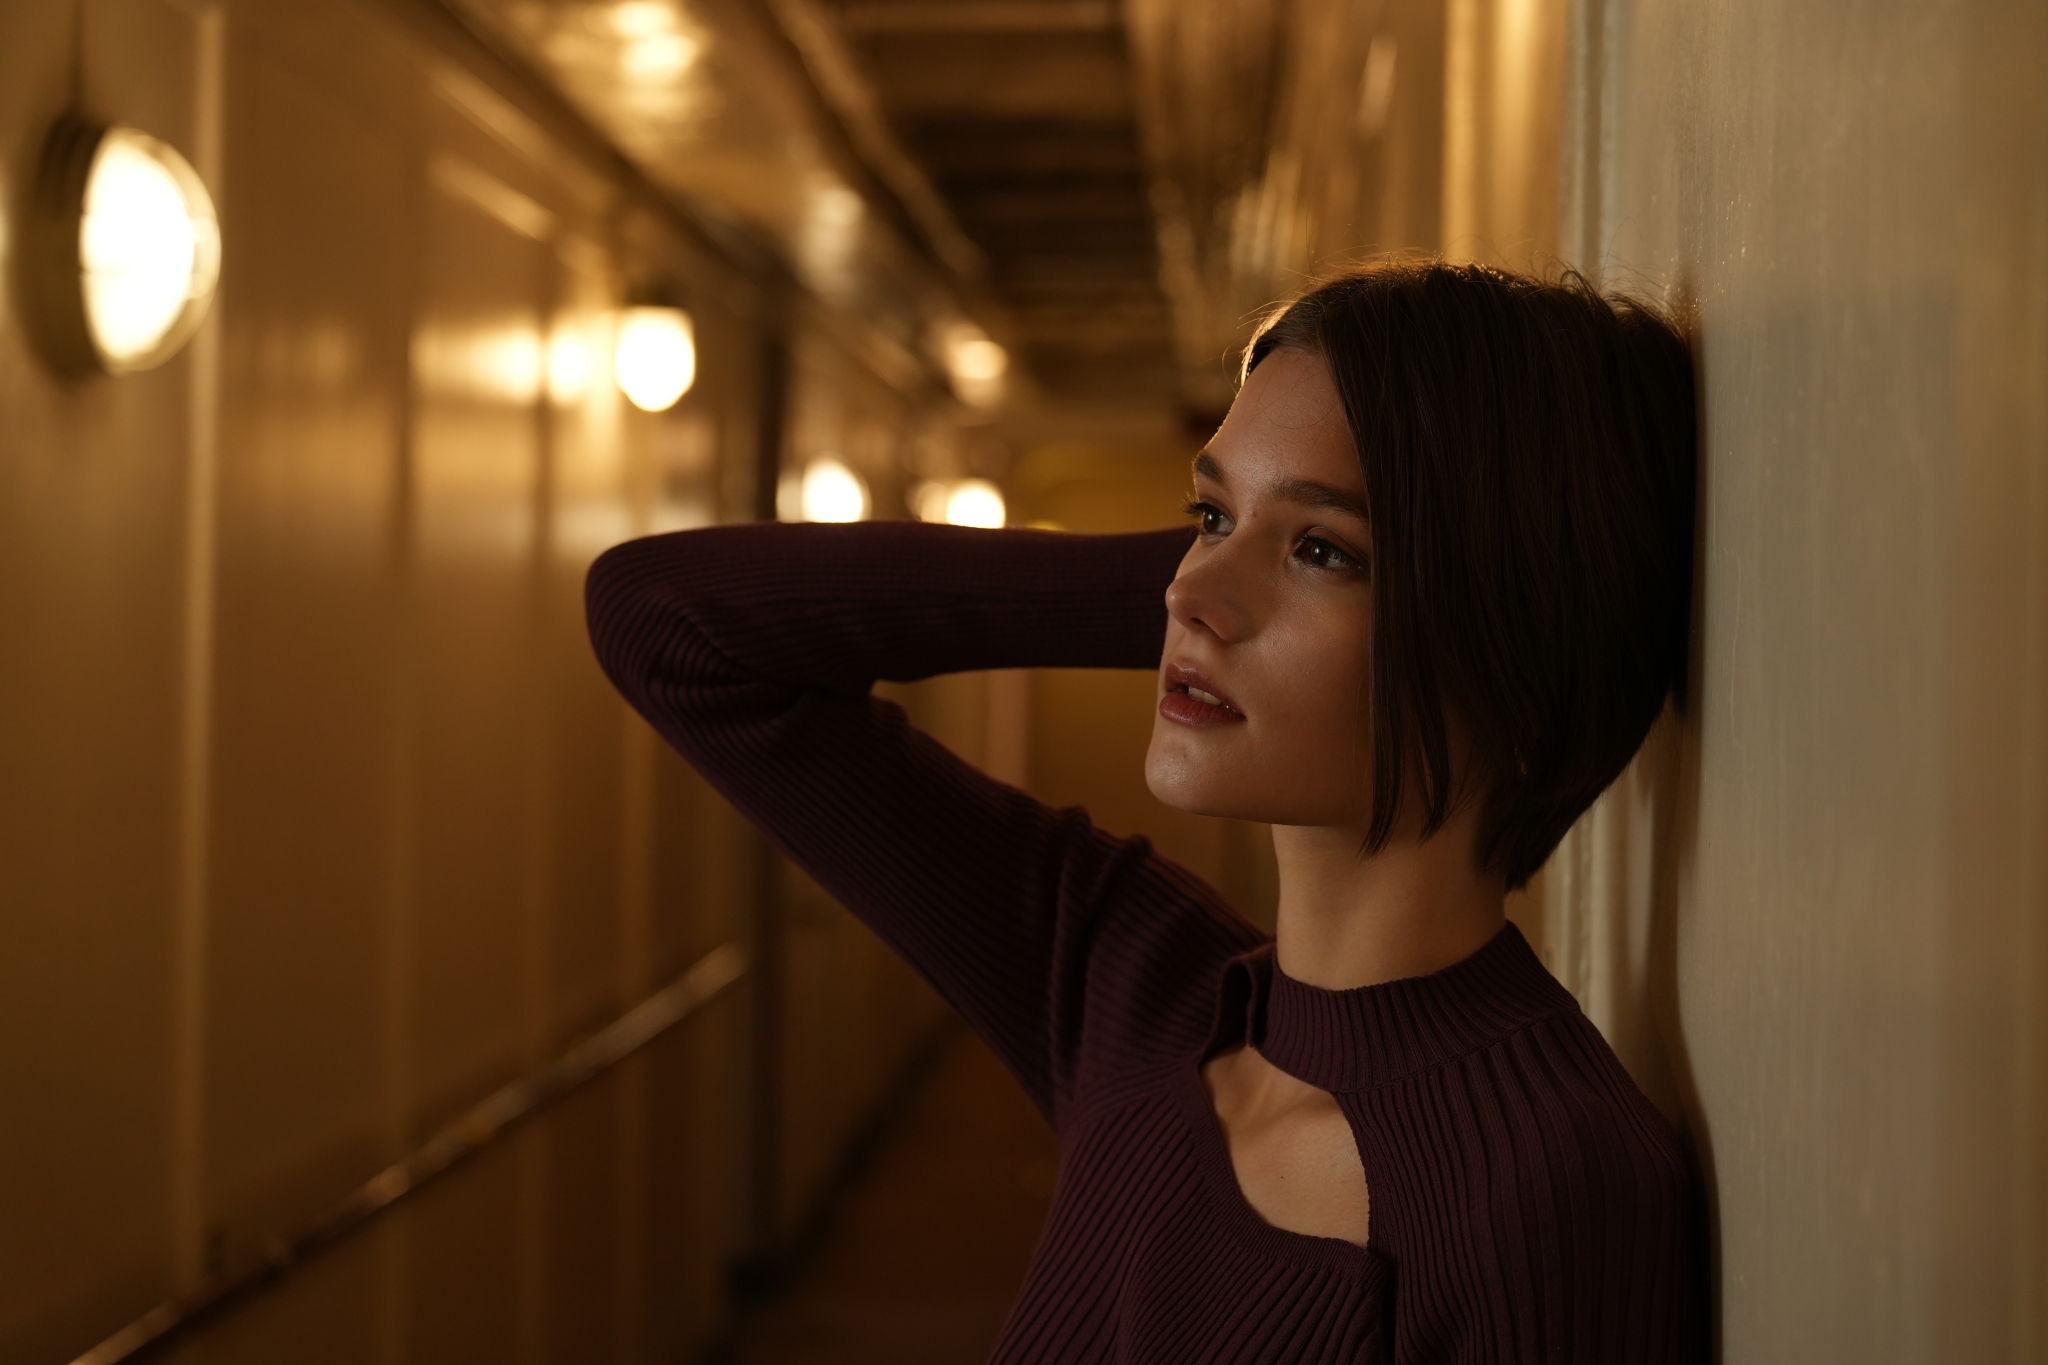 Female model in a dimly lit corridor, arm raised to her face